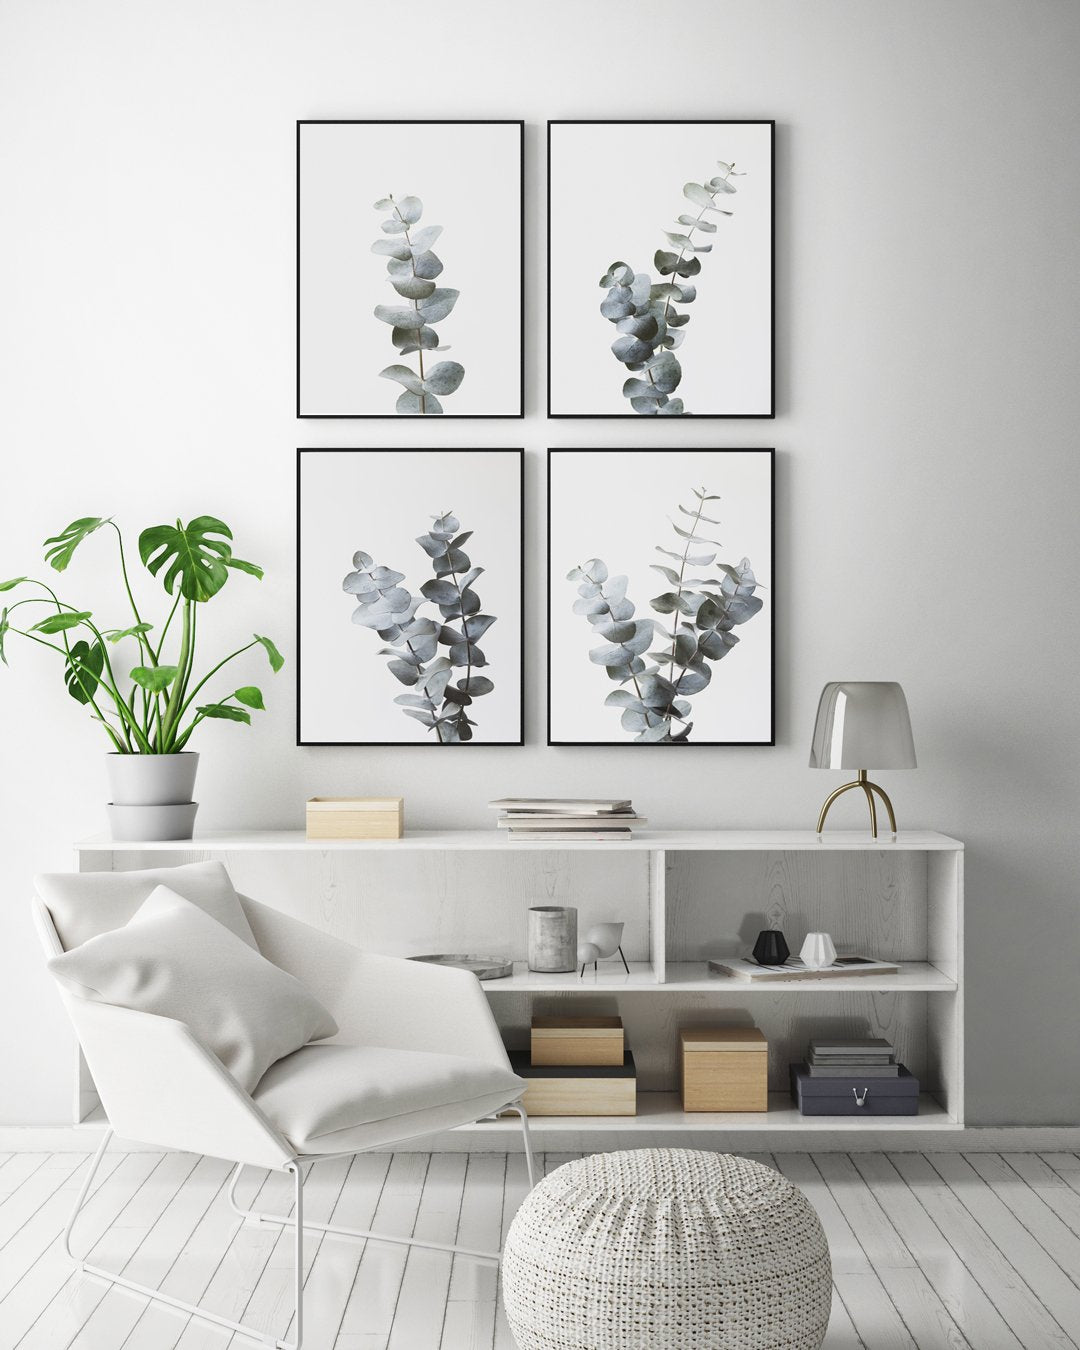 Stunning image showcasing the intricate details of a gum eucalyptus branch, ideal for wall decor.